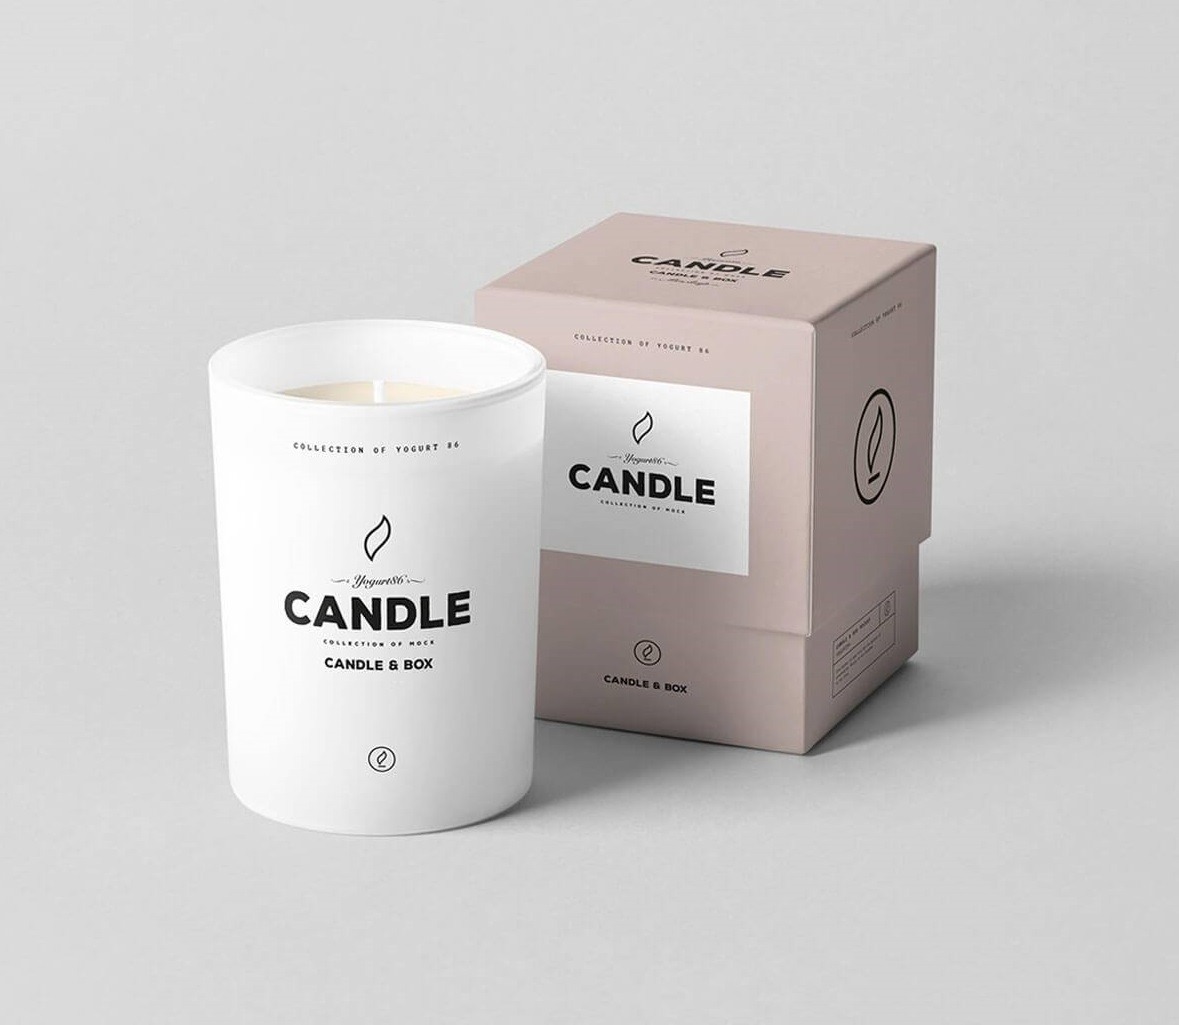 What Finishing Touches Can Enhance Retail Candle Boxes?